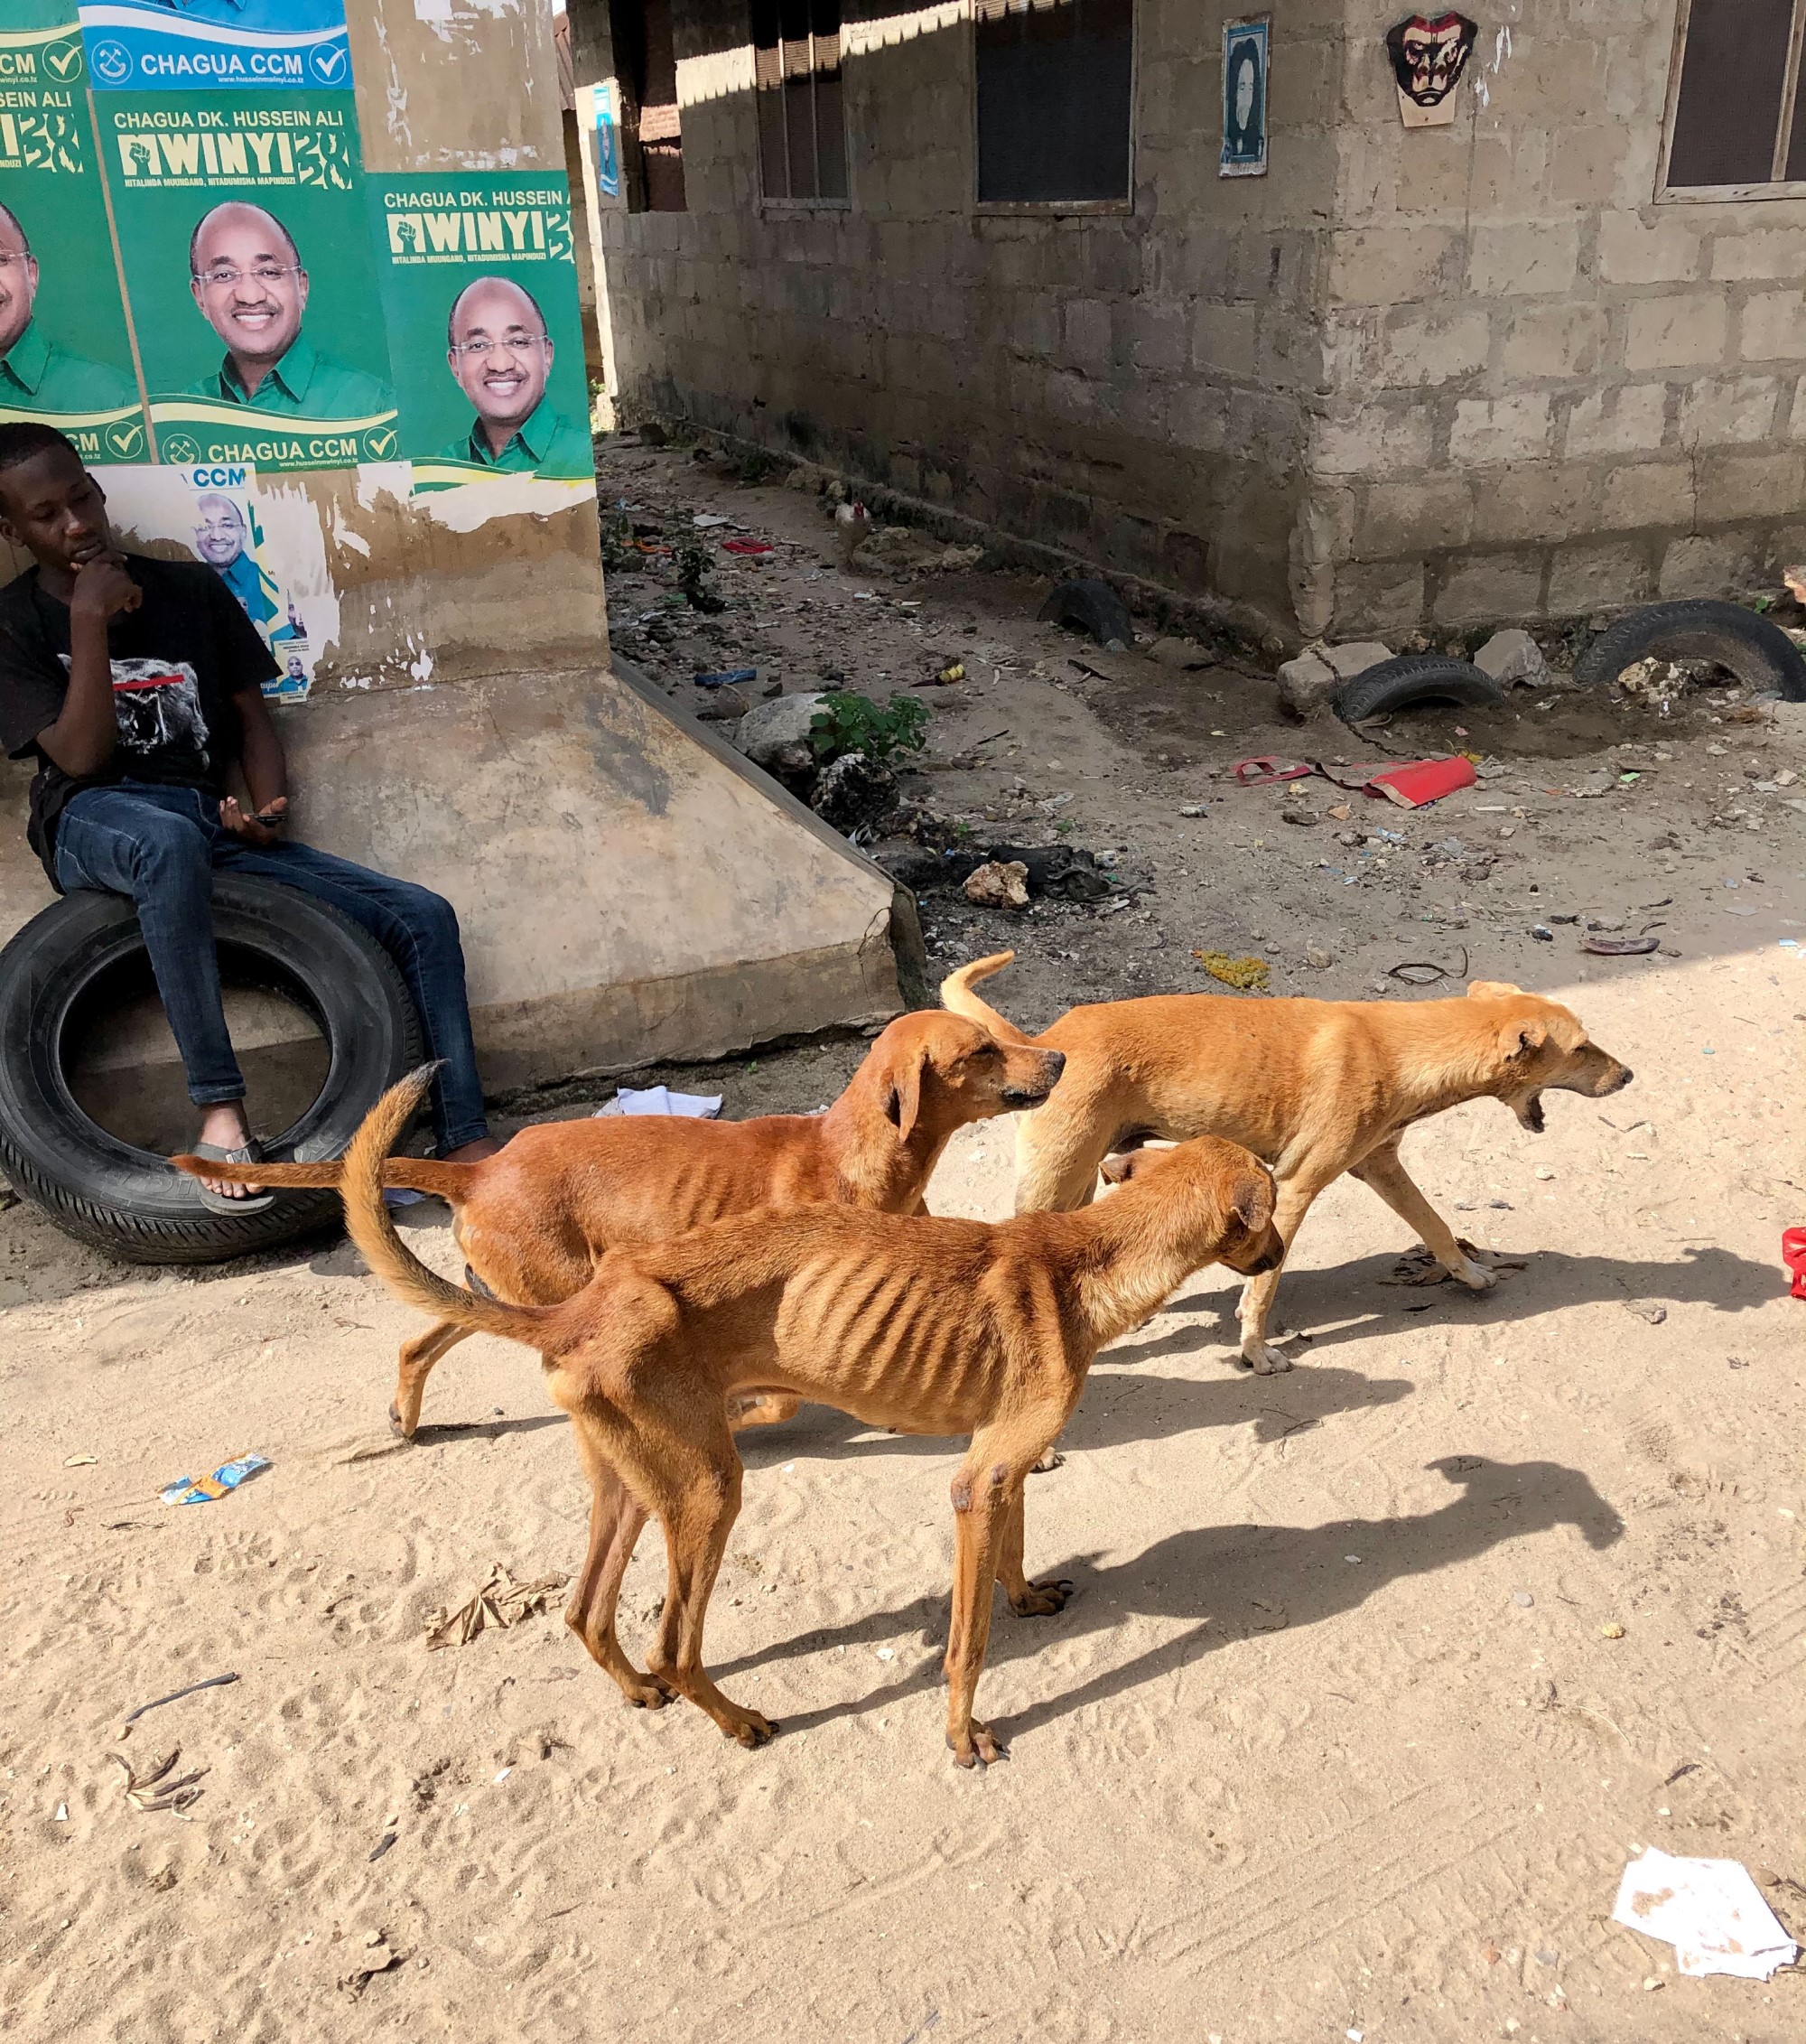 Street dogs roam the streets causing a potential public health risk. 